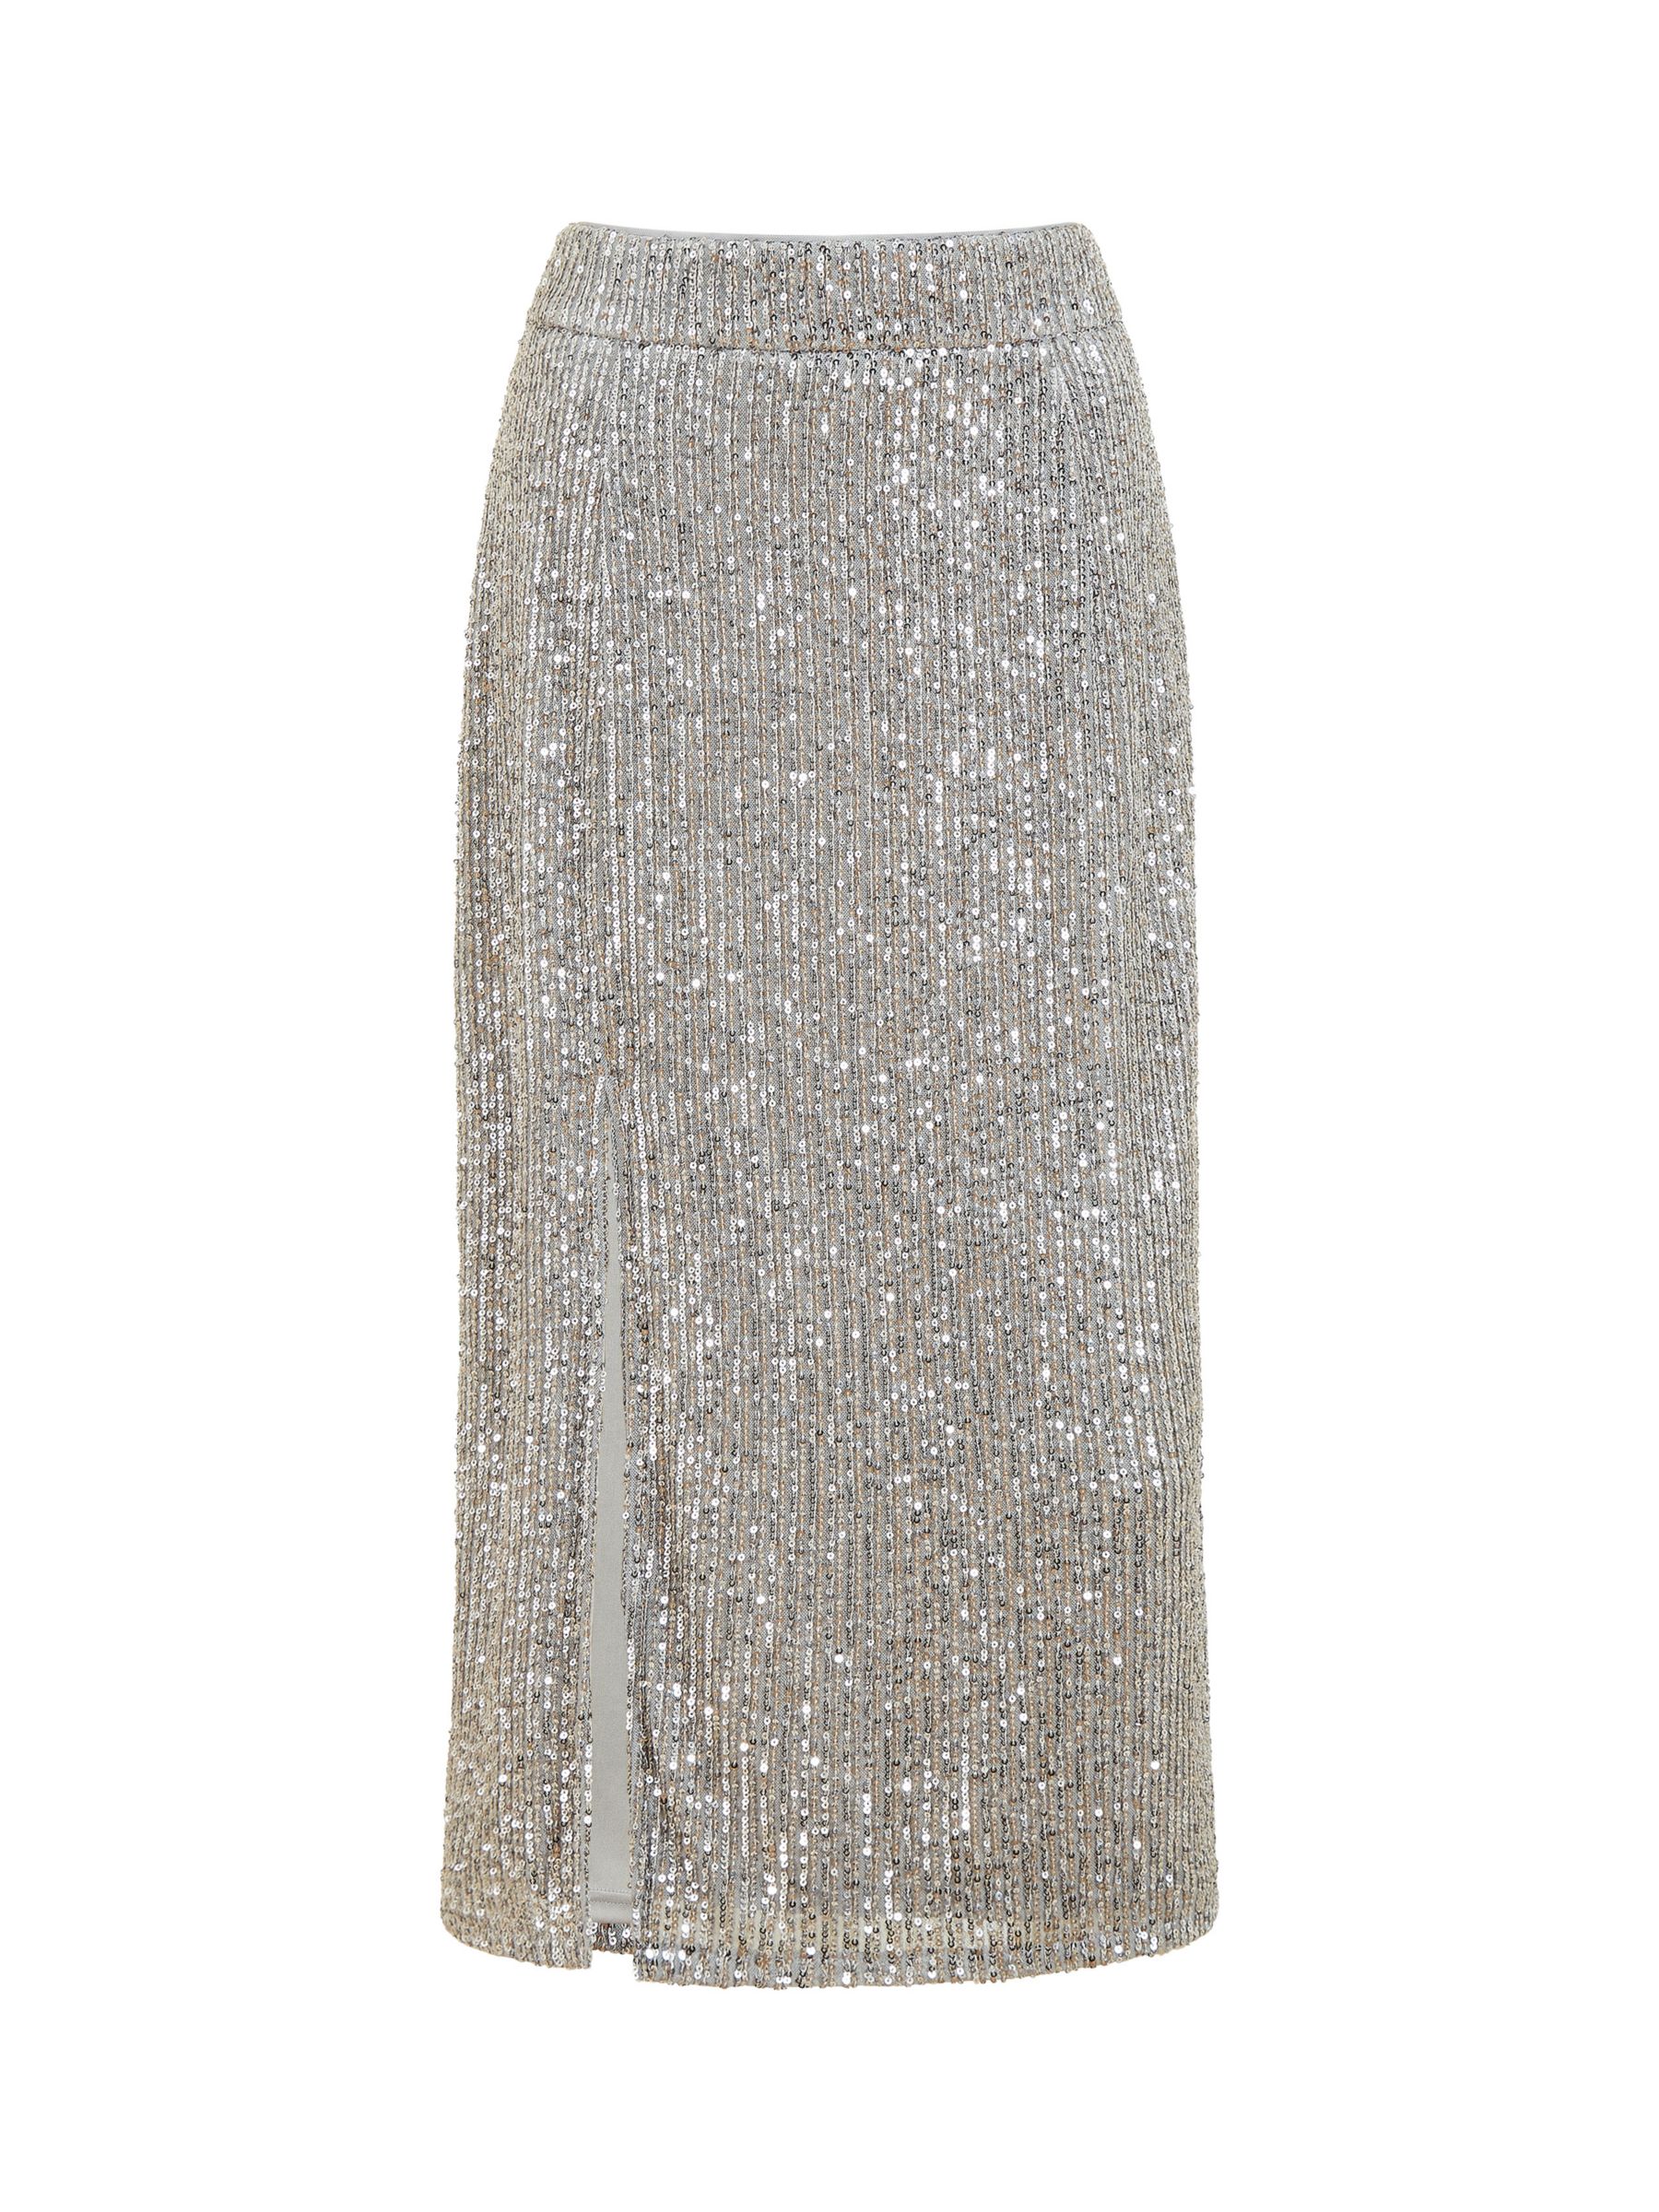 Yumi Sequin Fitted Midi Skirt at John Lewis & Partners